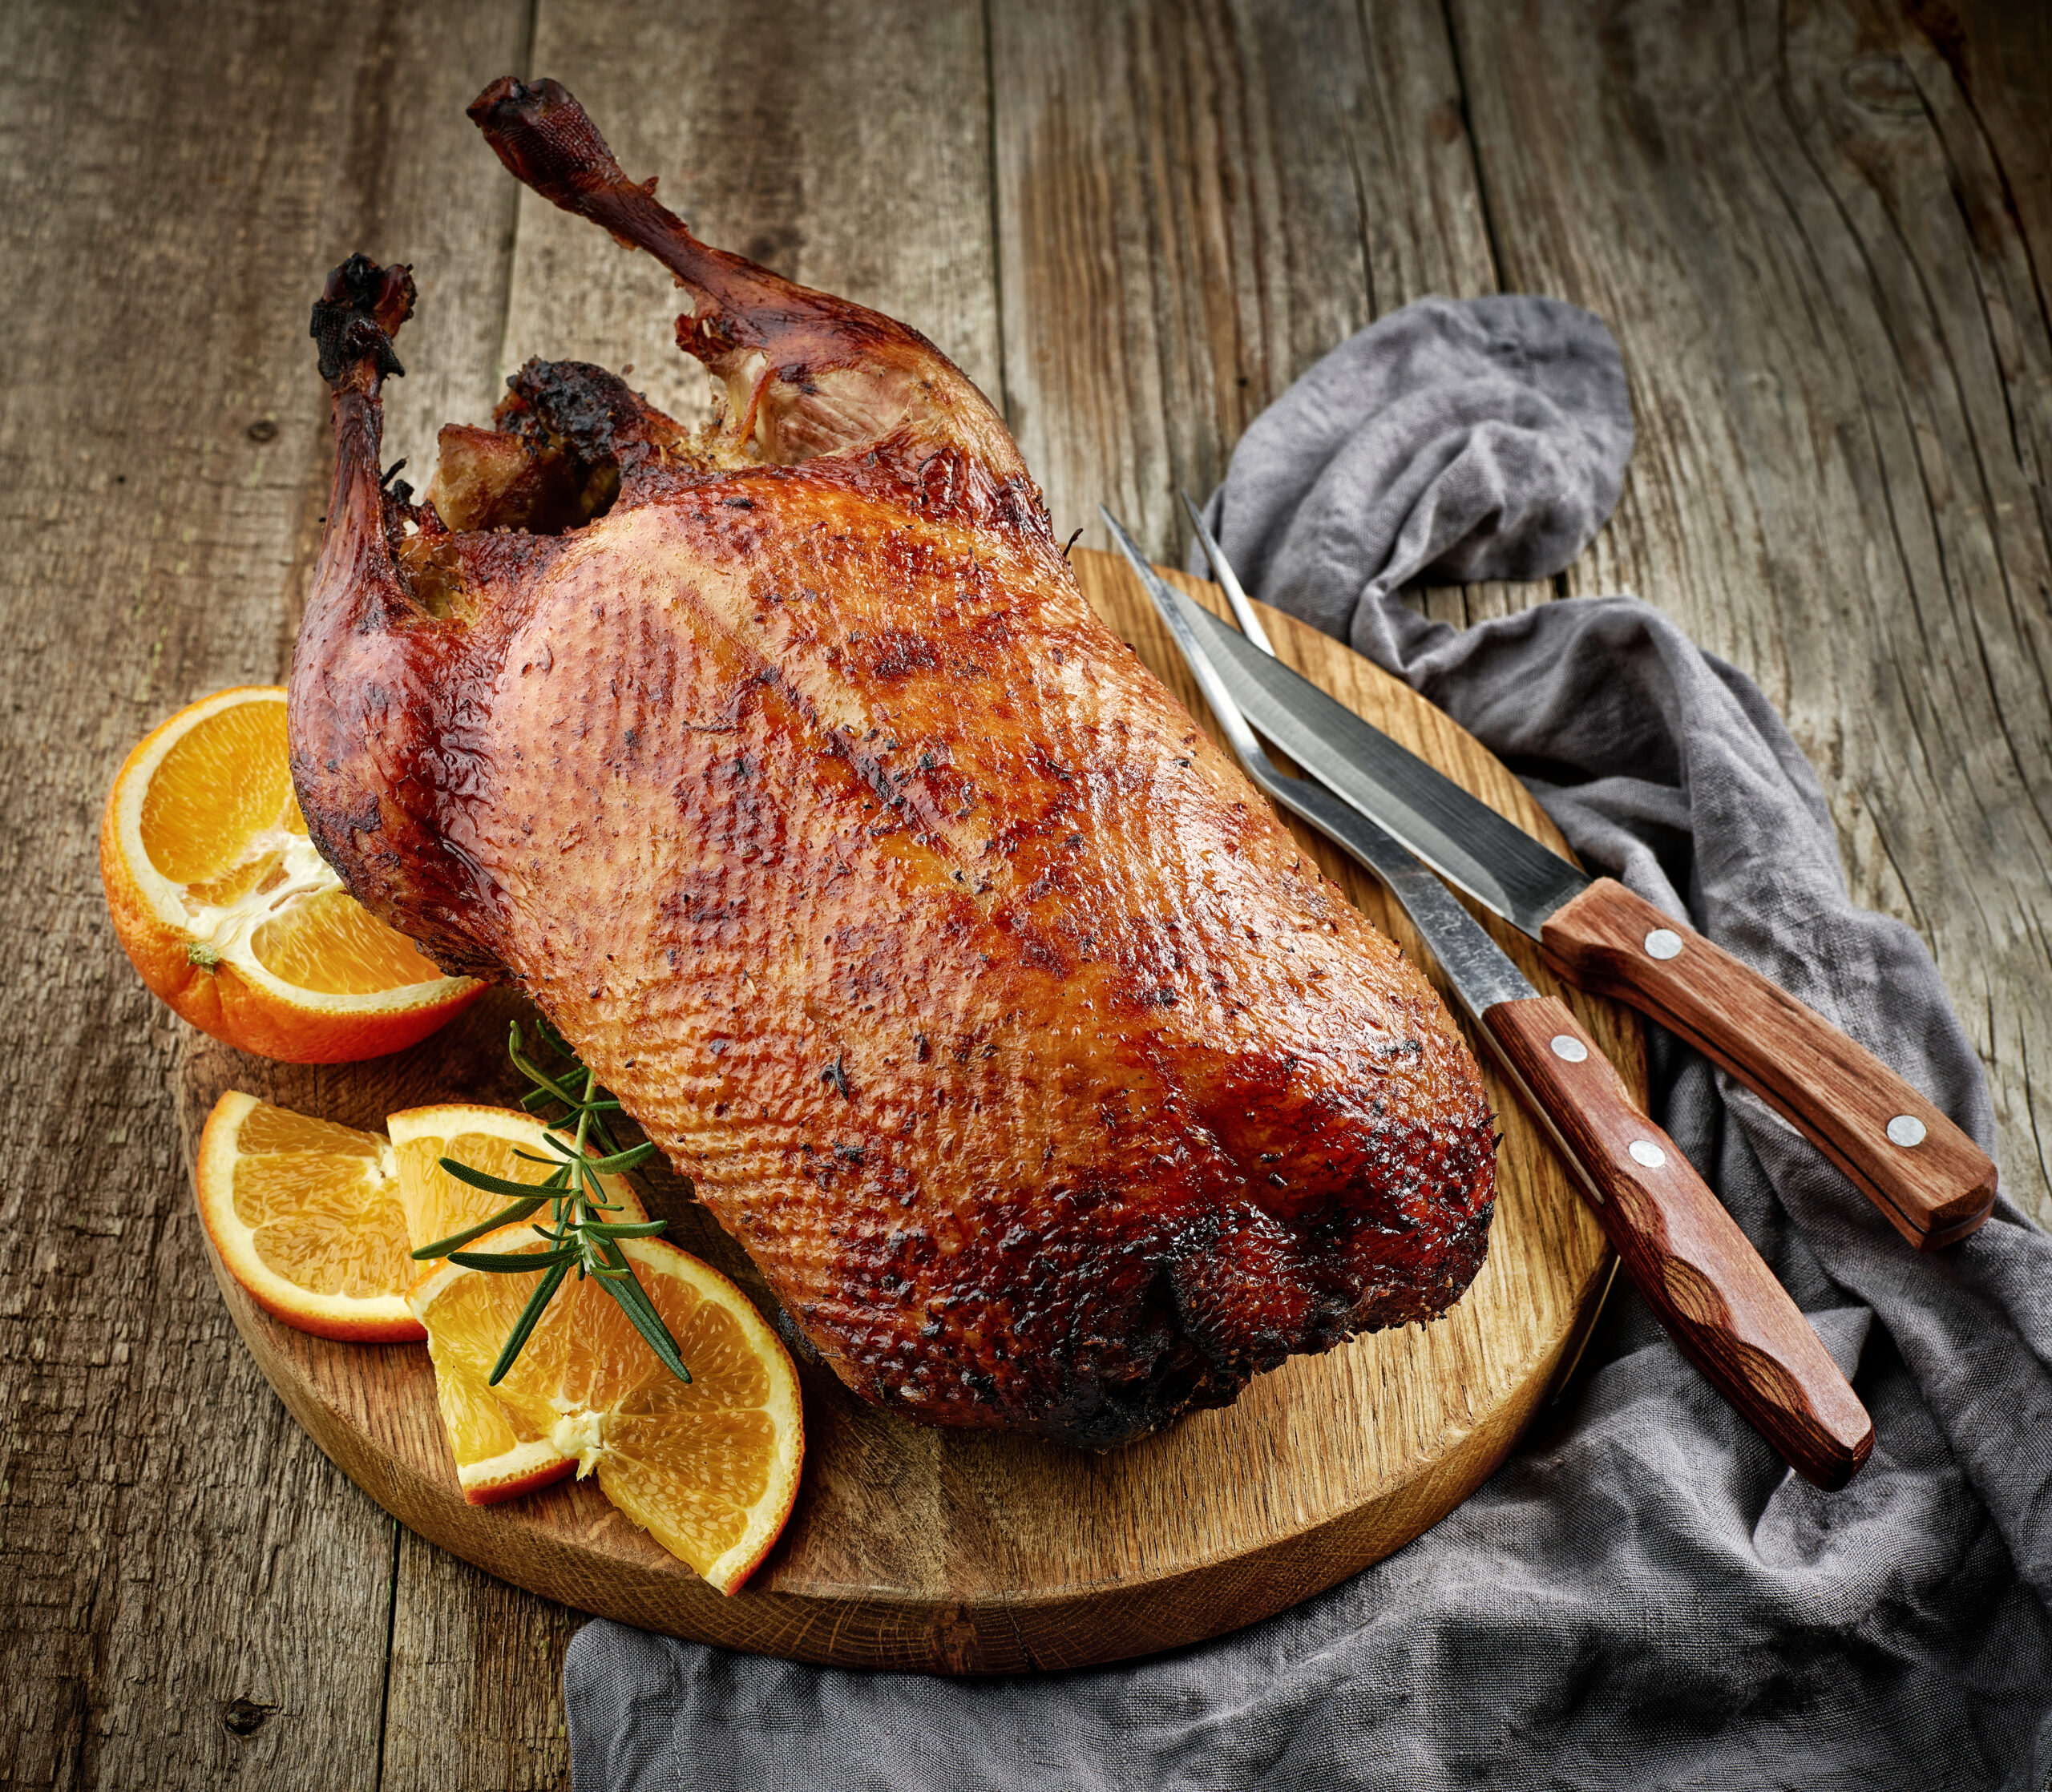 A grilled duck on a cutting board with orange slices on the side.